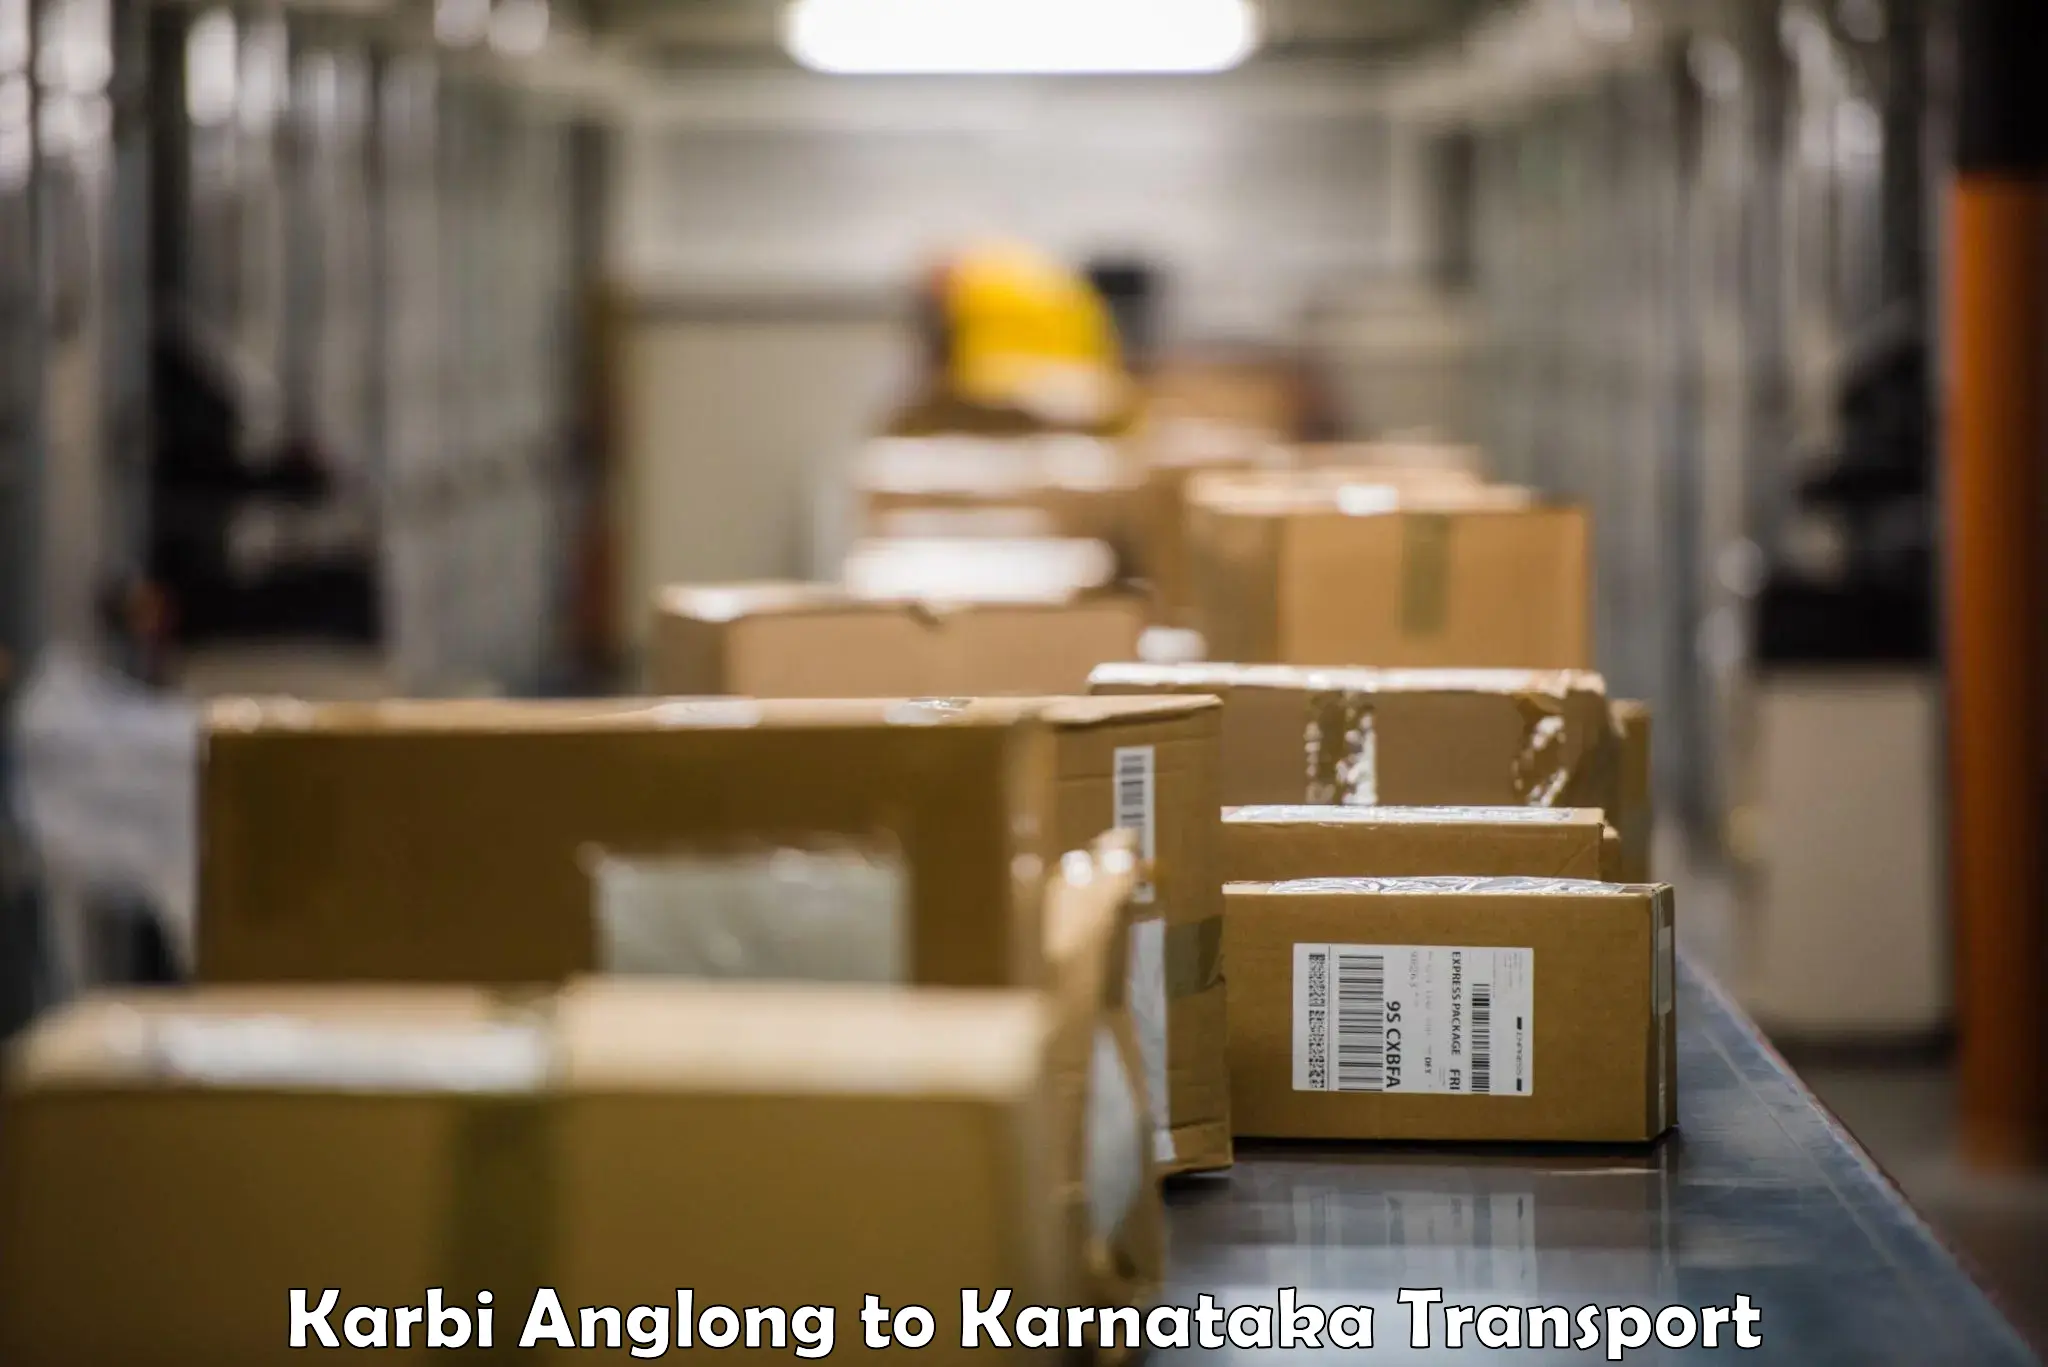 Truck transport companies in India in Karbi Anglong to Mahalingpur